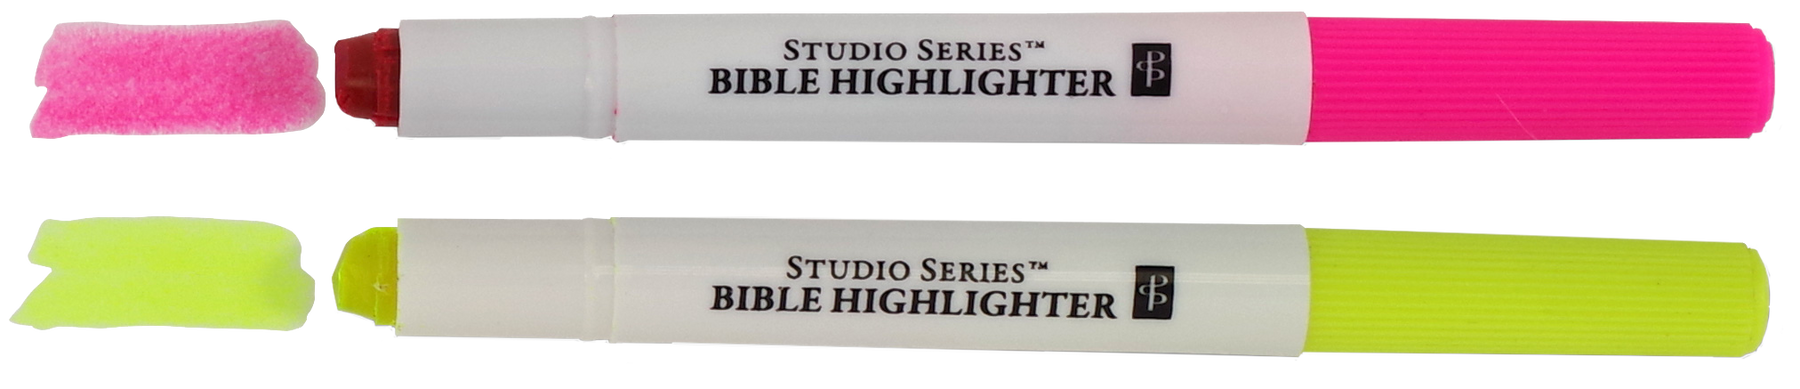 Bible Safe Gel Highlighters, Fluorescent Colors - Yellow, Orange, Pink,  Blue, Green, Purple, 6 Highlighters - King Soopers